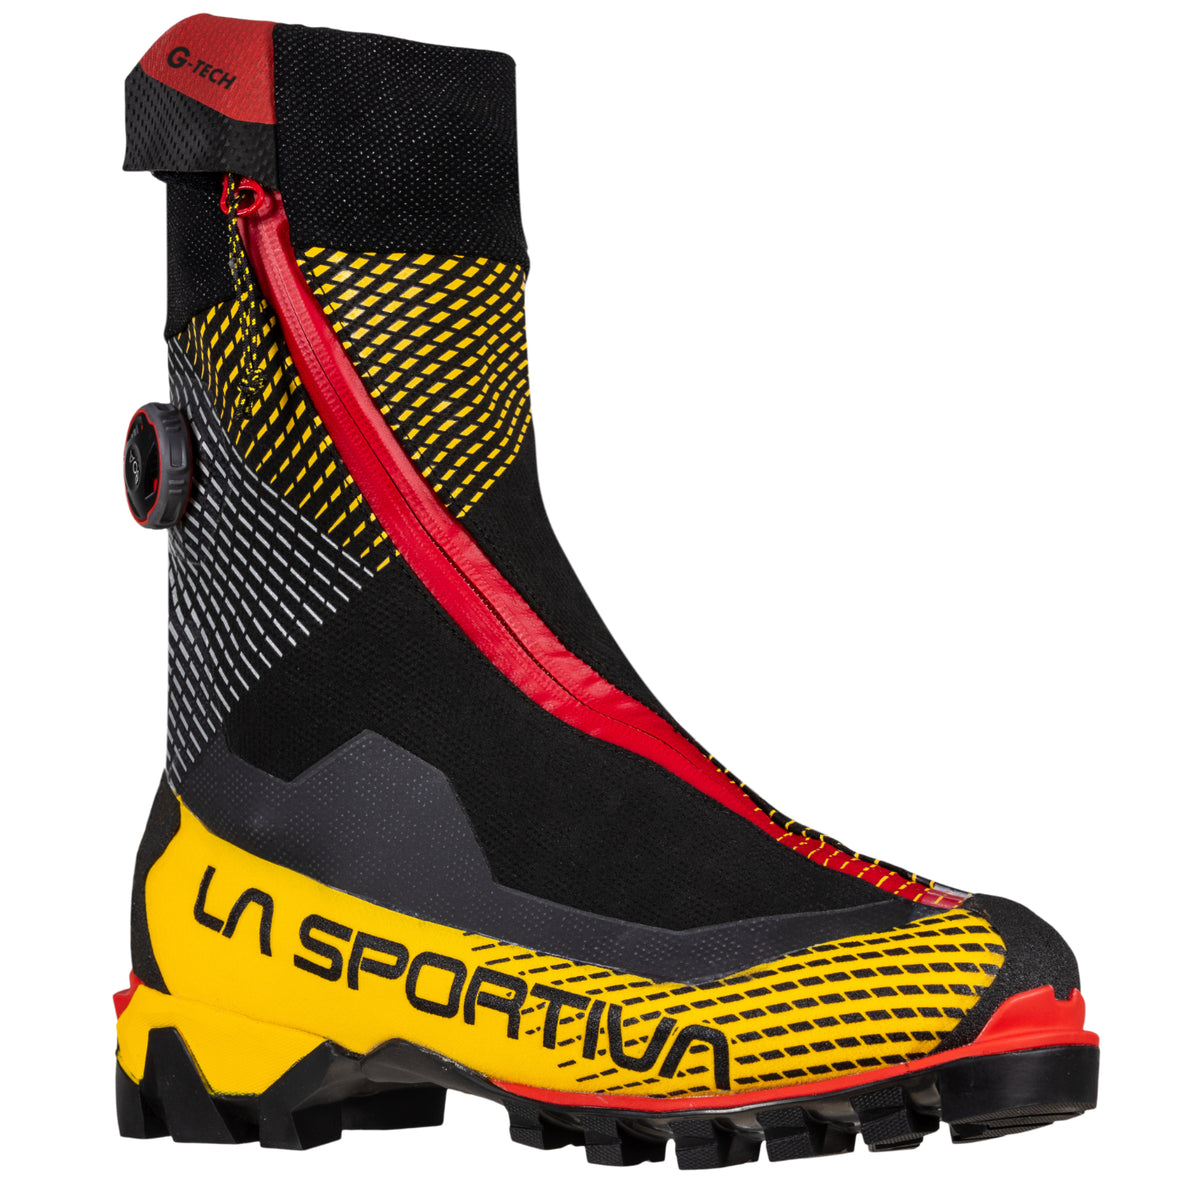 La Sportiva G-Tech mountaineering boots in black red and yellow, showing side on